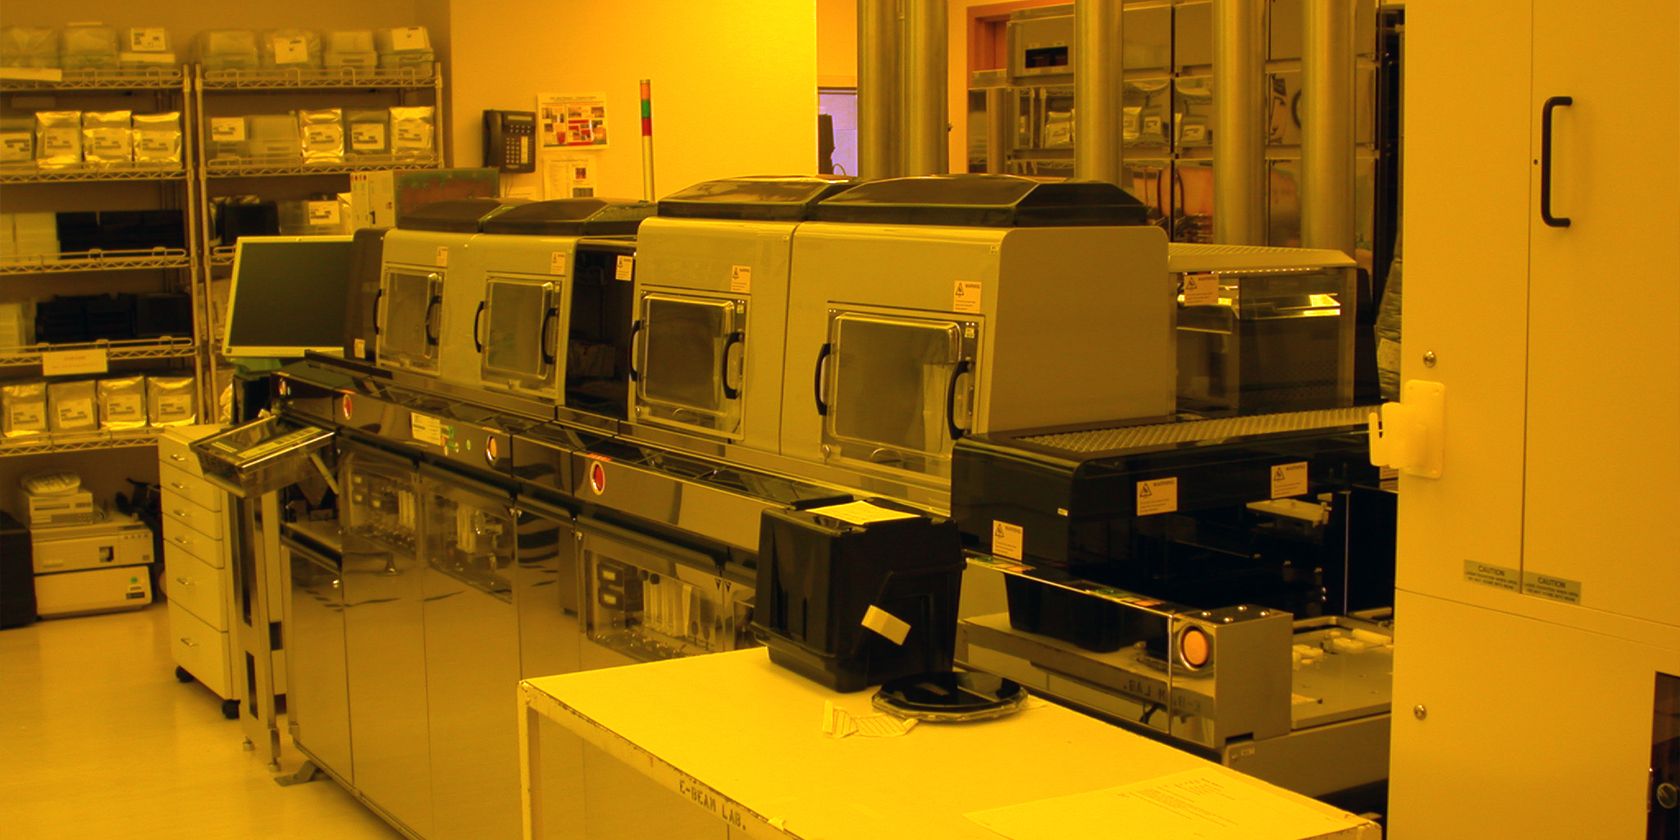 Photolithography Machines in a Laboratory